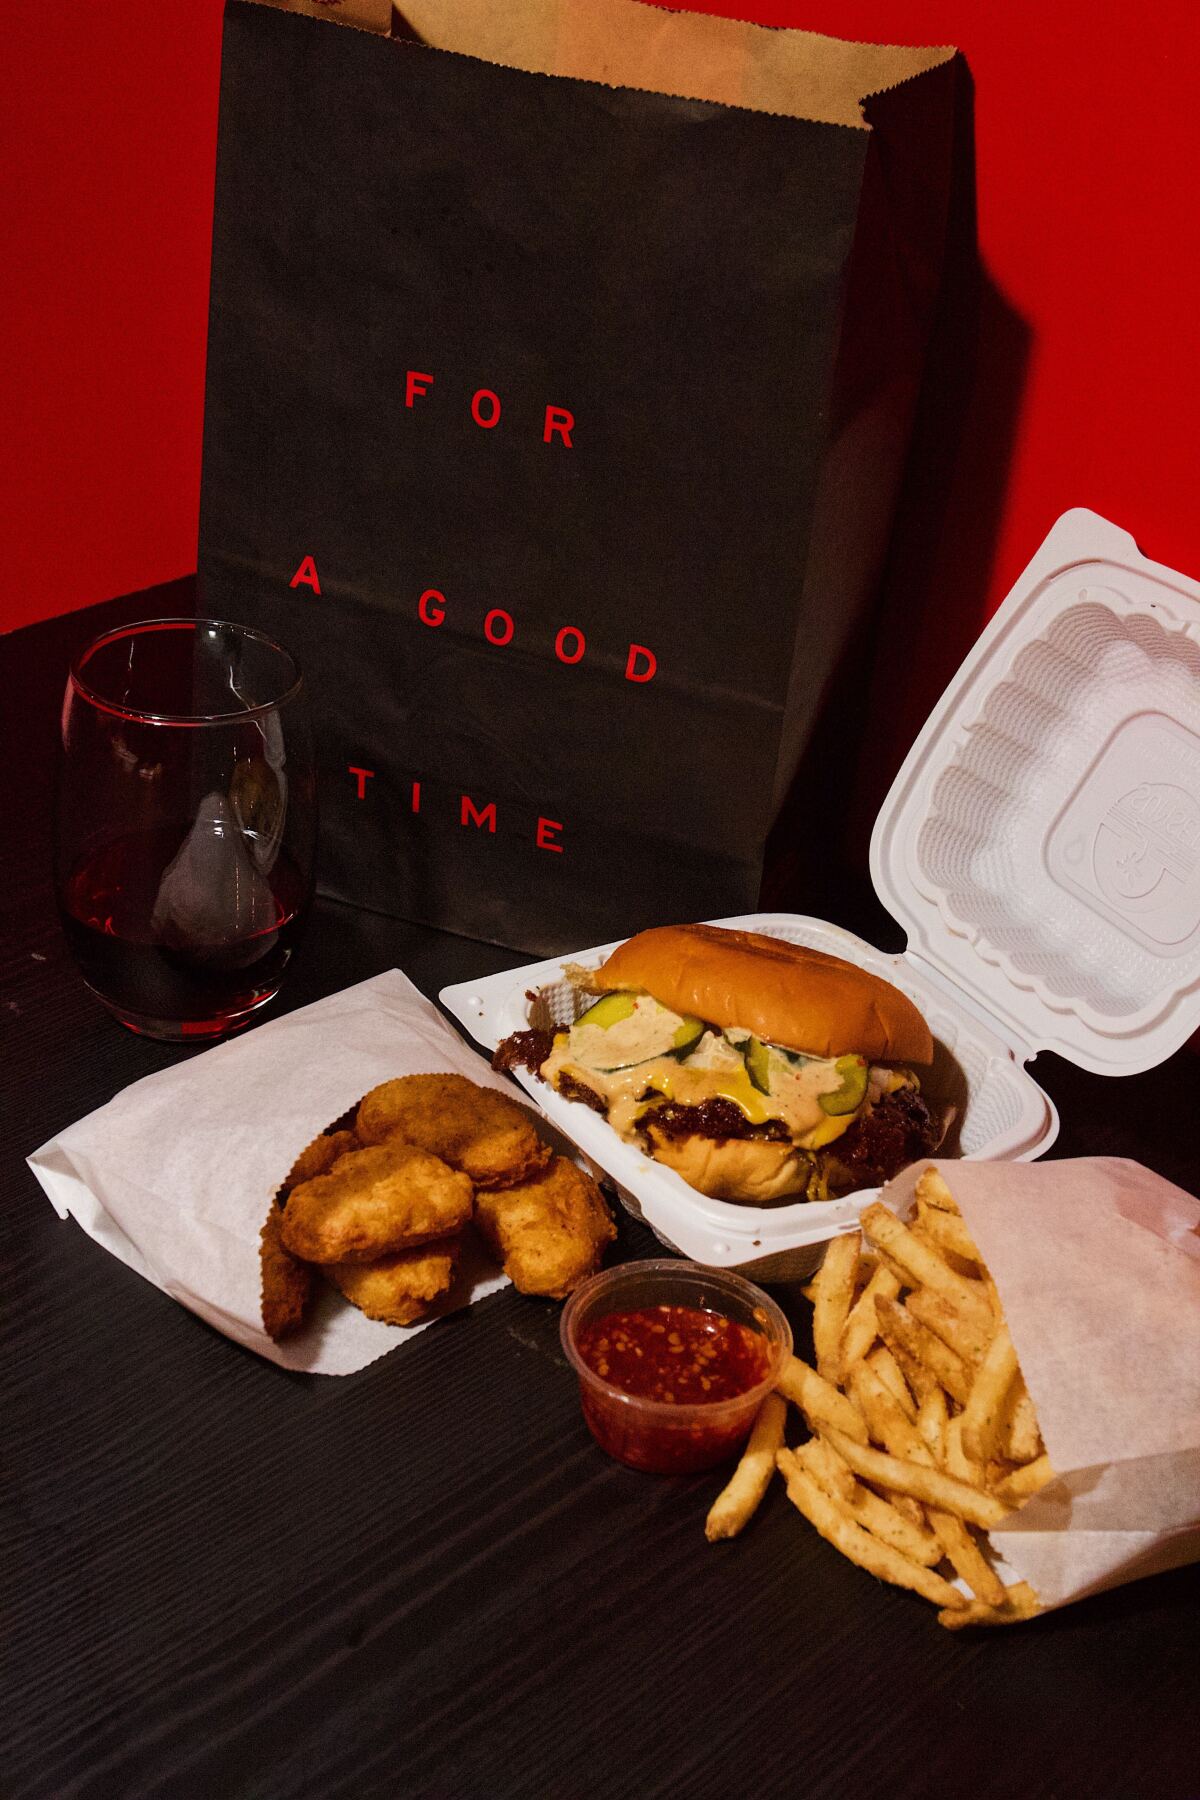 A cheeseburger, chicken nuggets, bag of fries and glass of red wine.